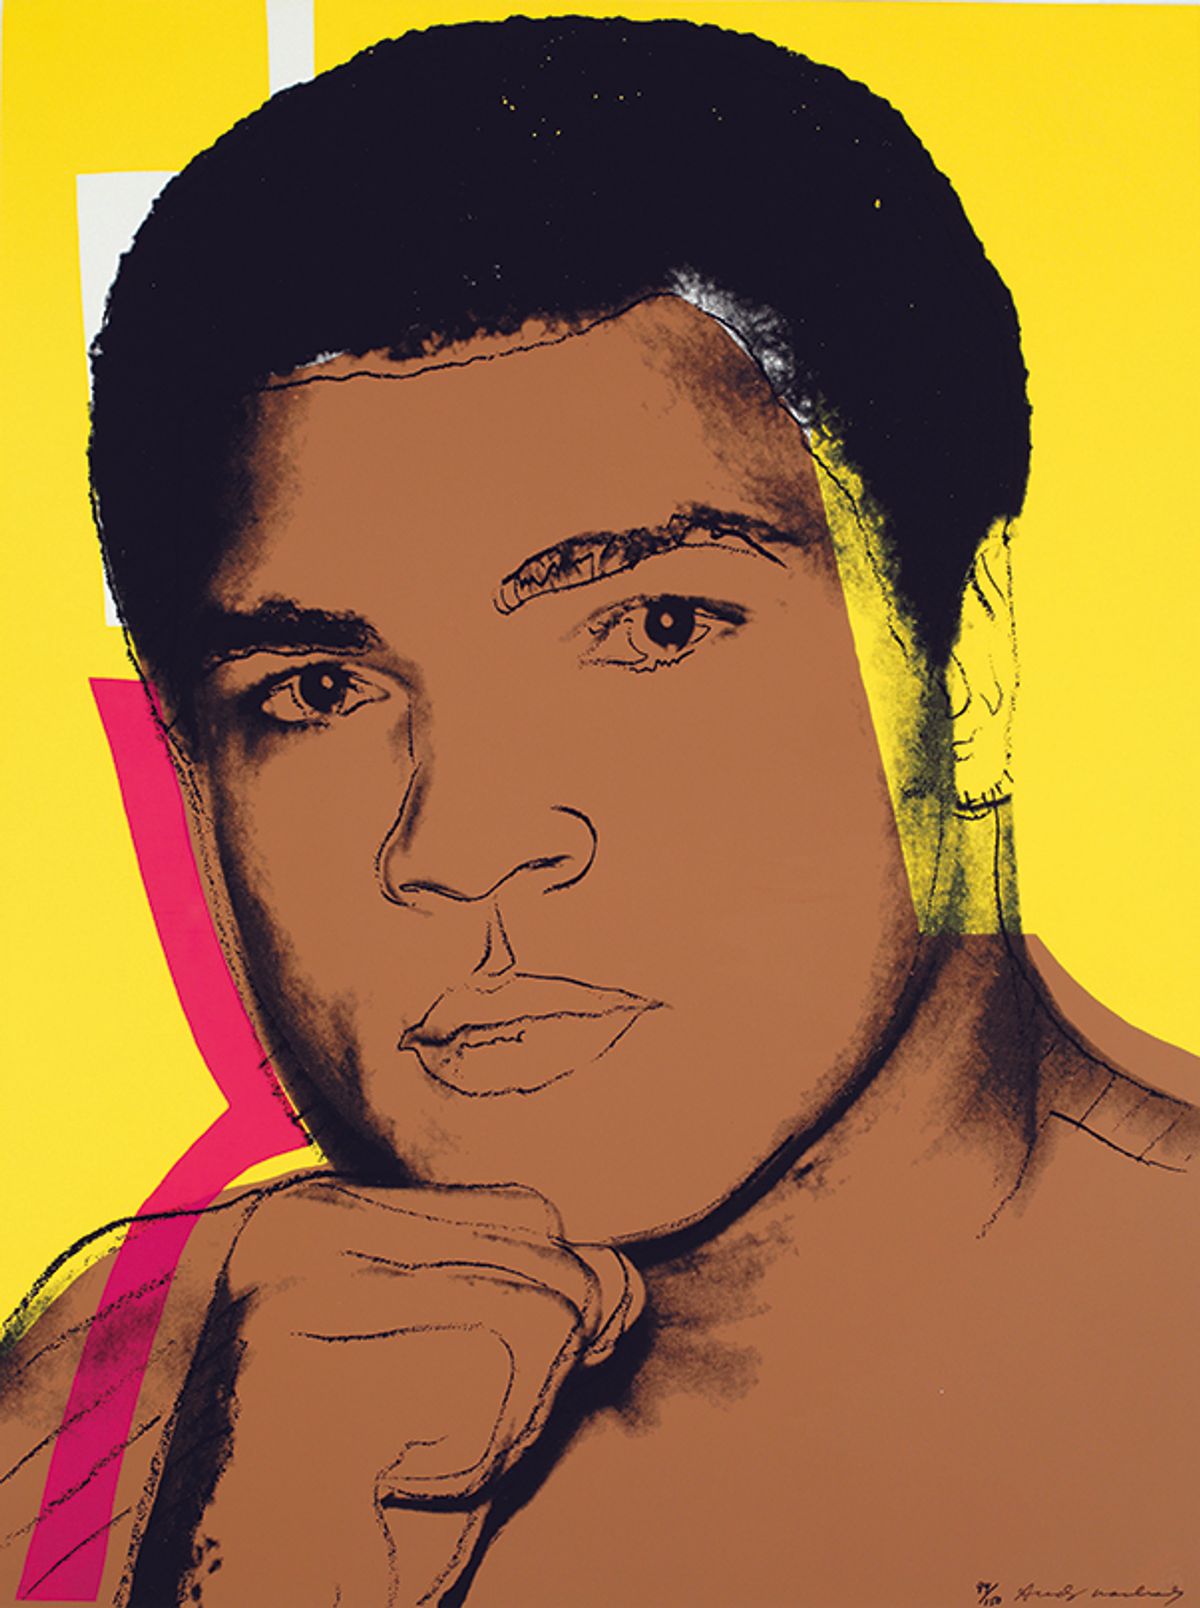 World famous for a great deal longer than 15 minutes: Andy Warhol’s Muhammad Ali screen print (1978)

© Andy Warhol Foundation for the Visual Arts